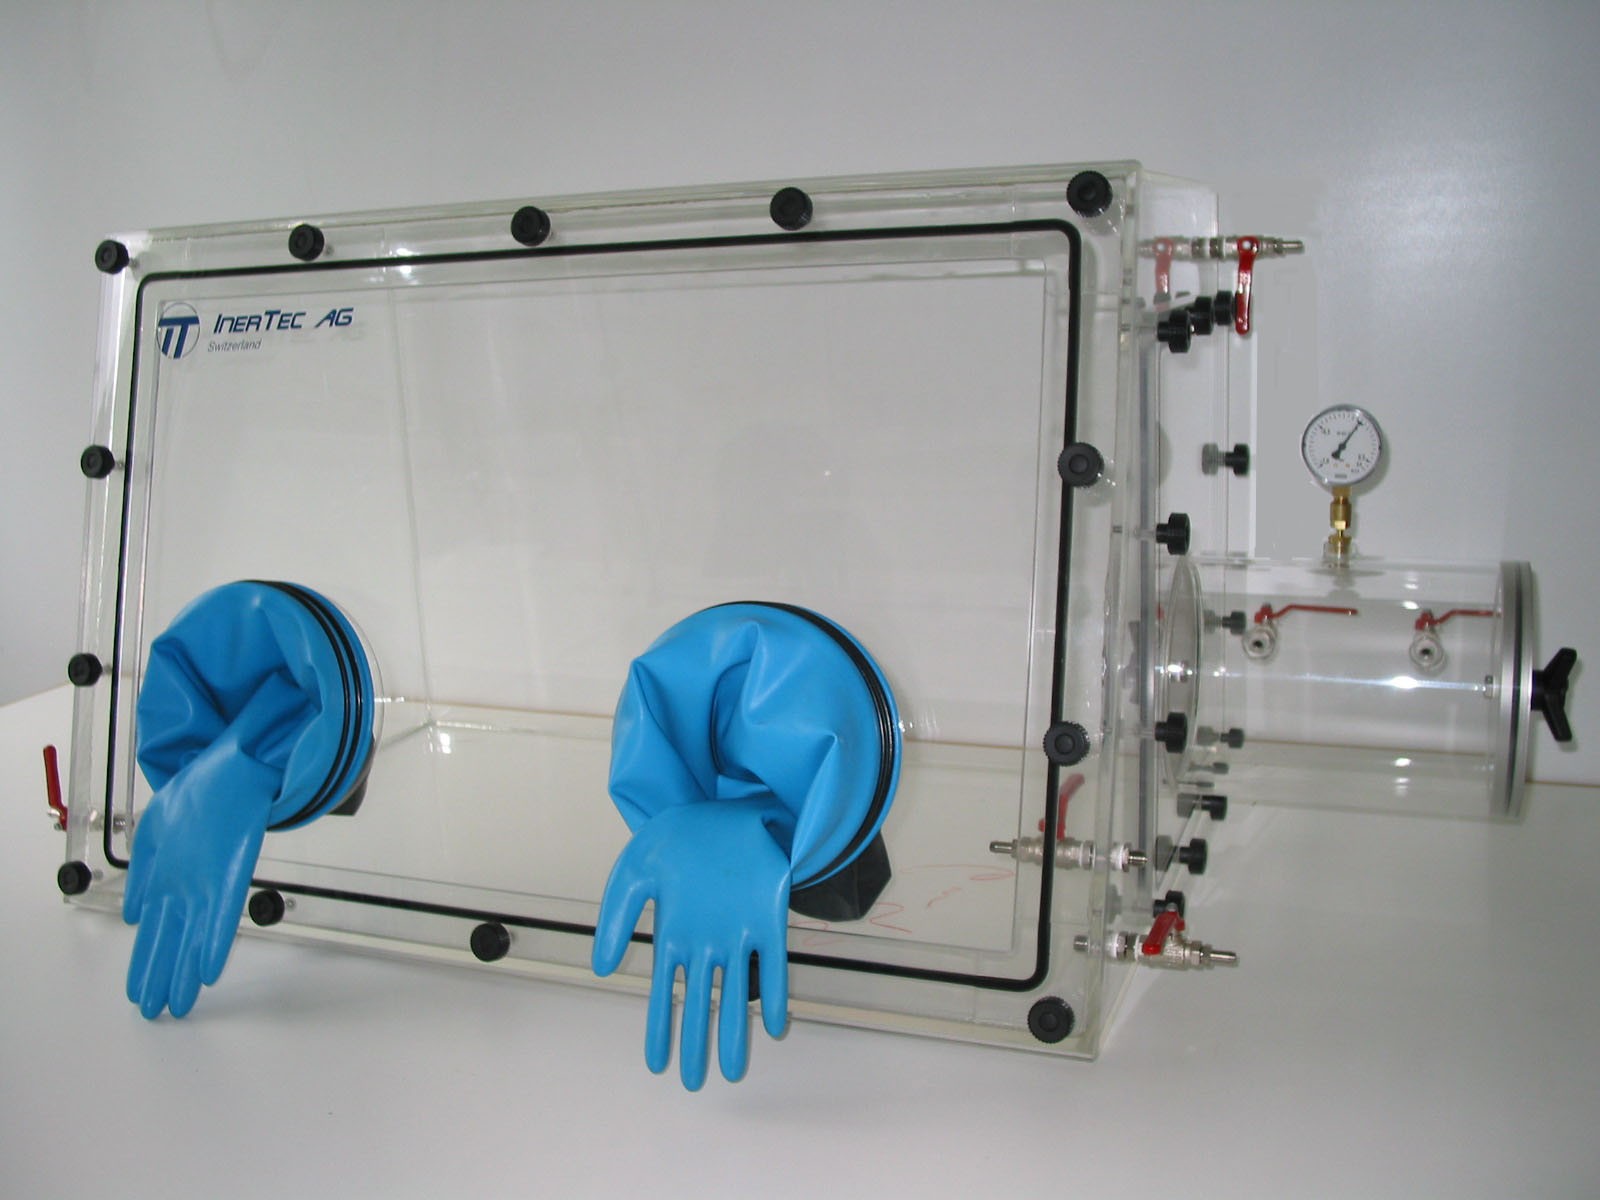 Glovebox made of acrylic&gt; Gas filling: automatic flushing with pressure control, front version: standard, side version: rectangular lock control: oxygen regulator